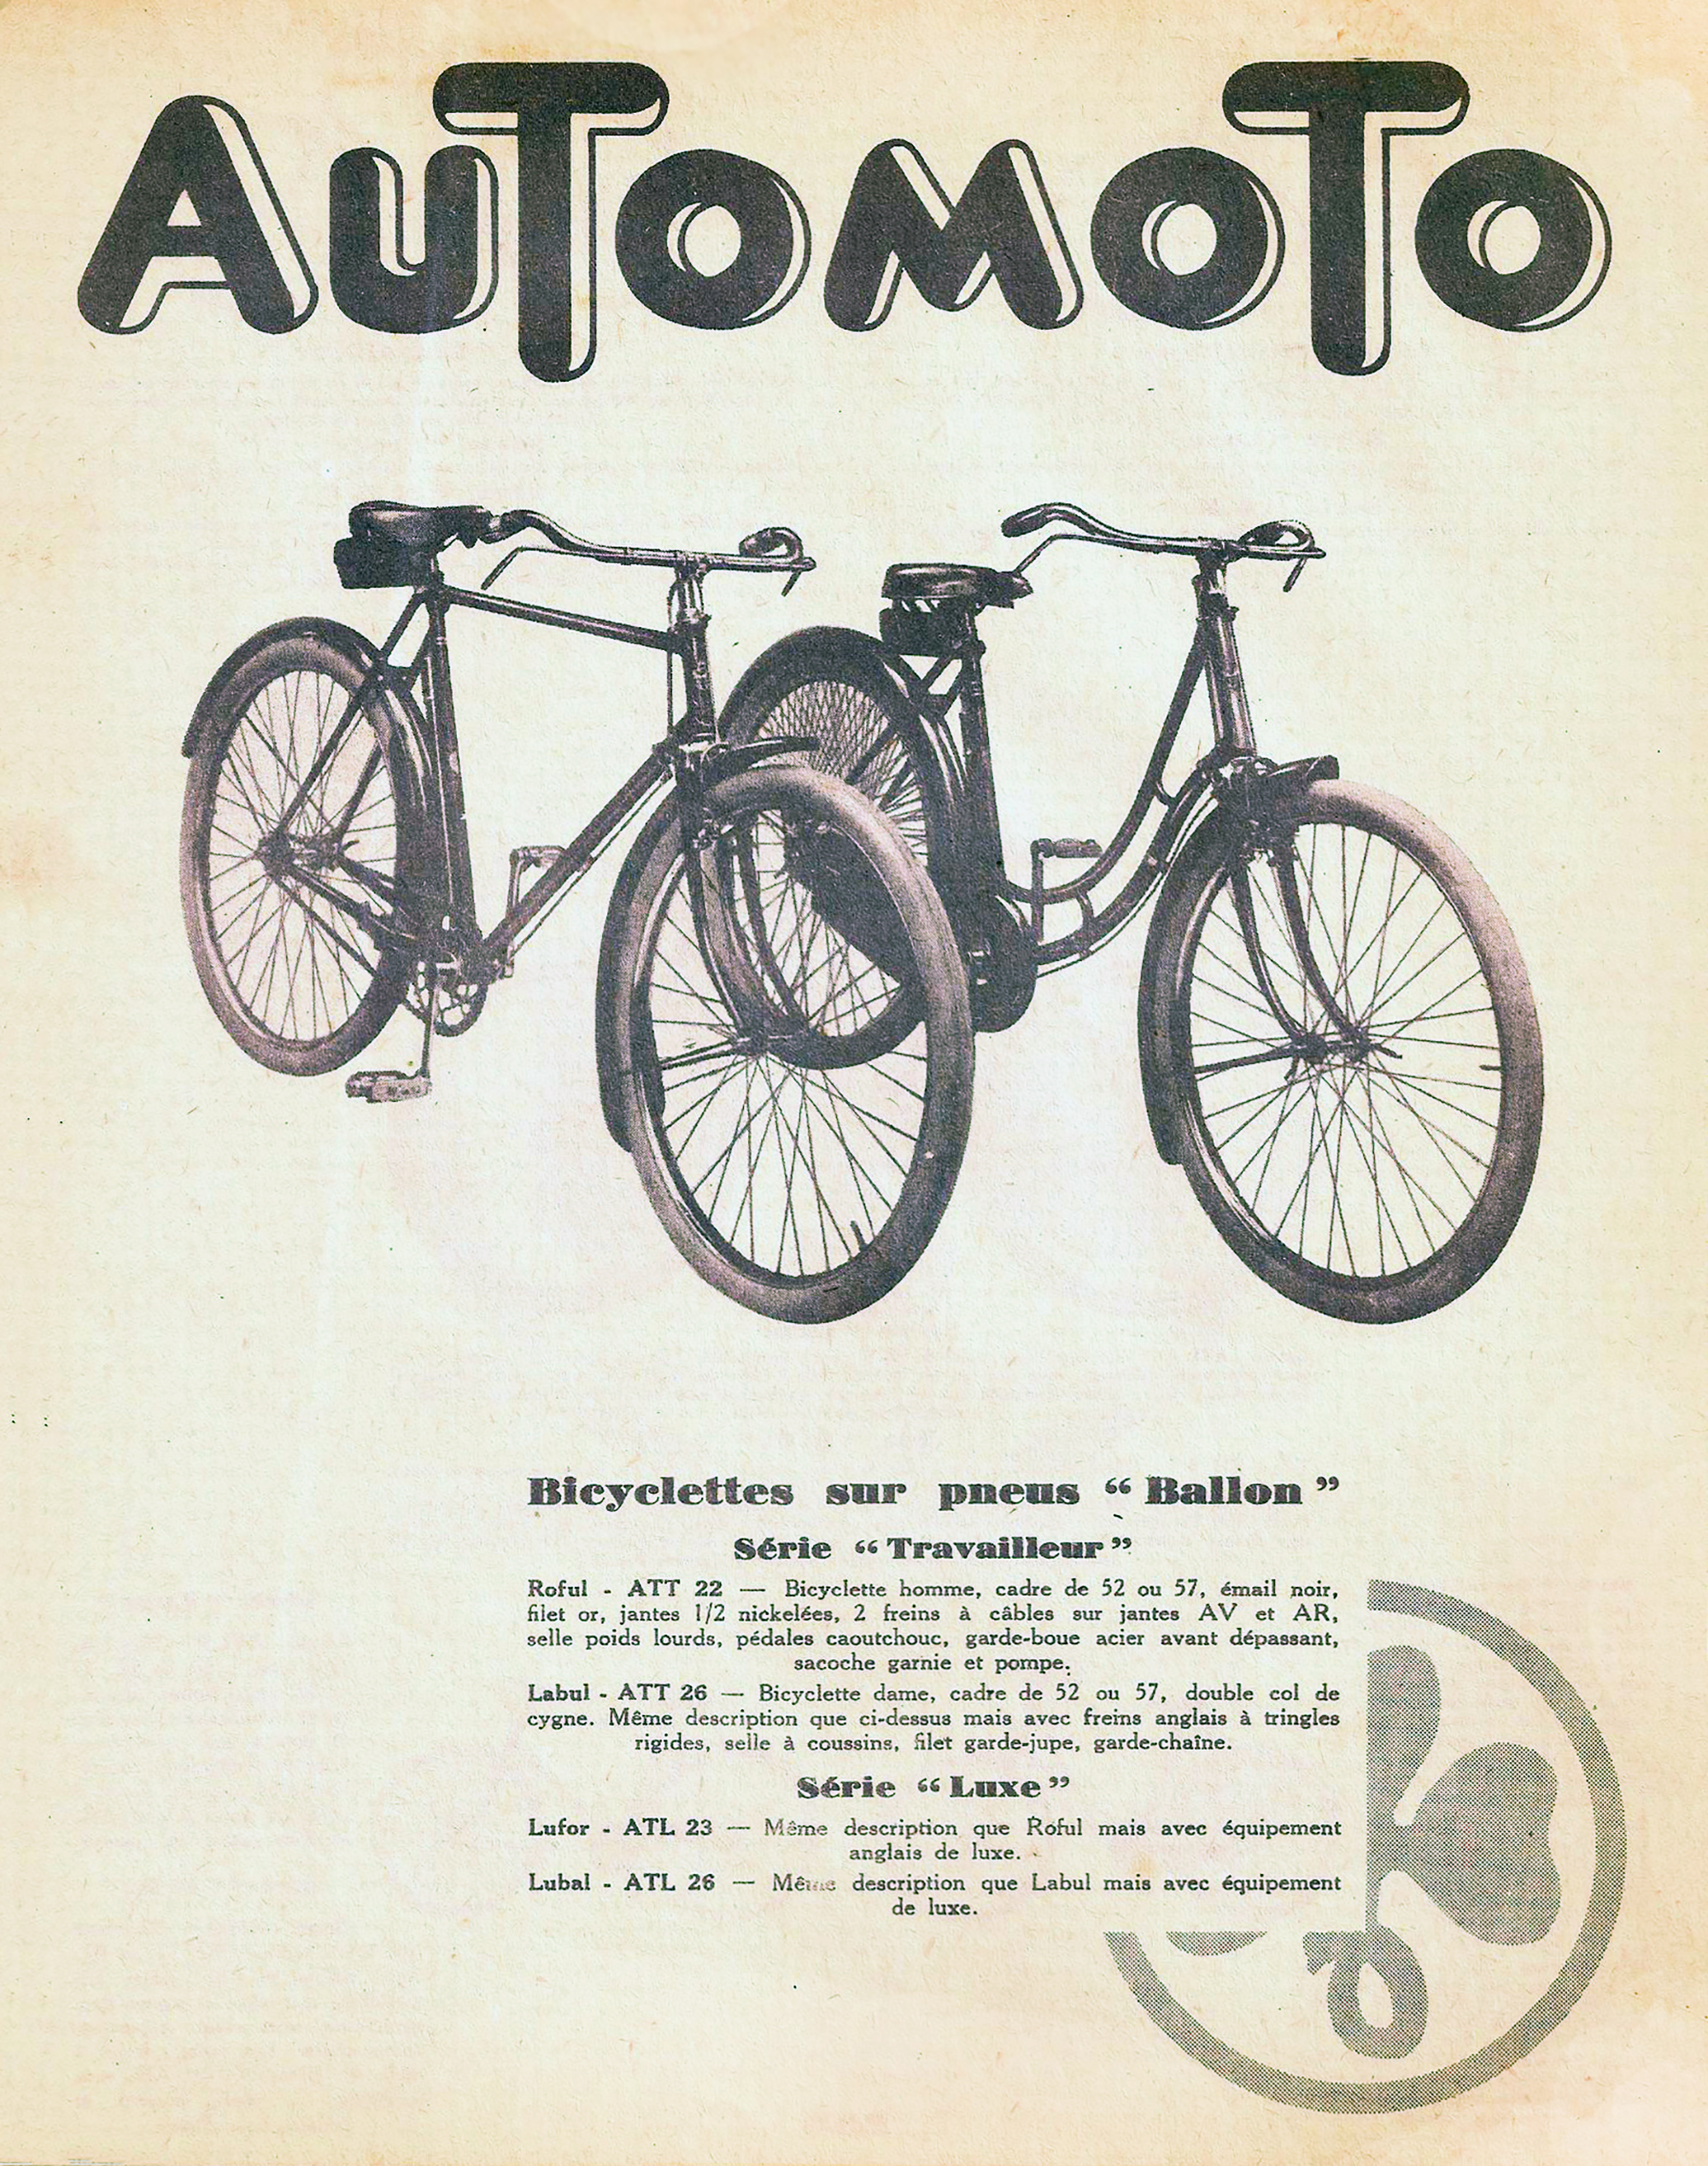 hiking, running, child Fac simile 1994 depliant bikes & cycles automoto 1953 